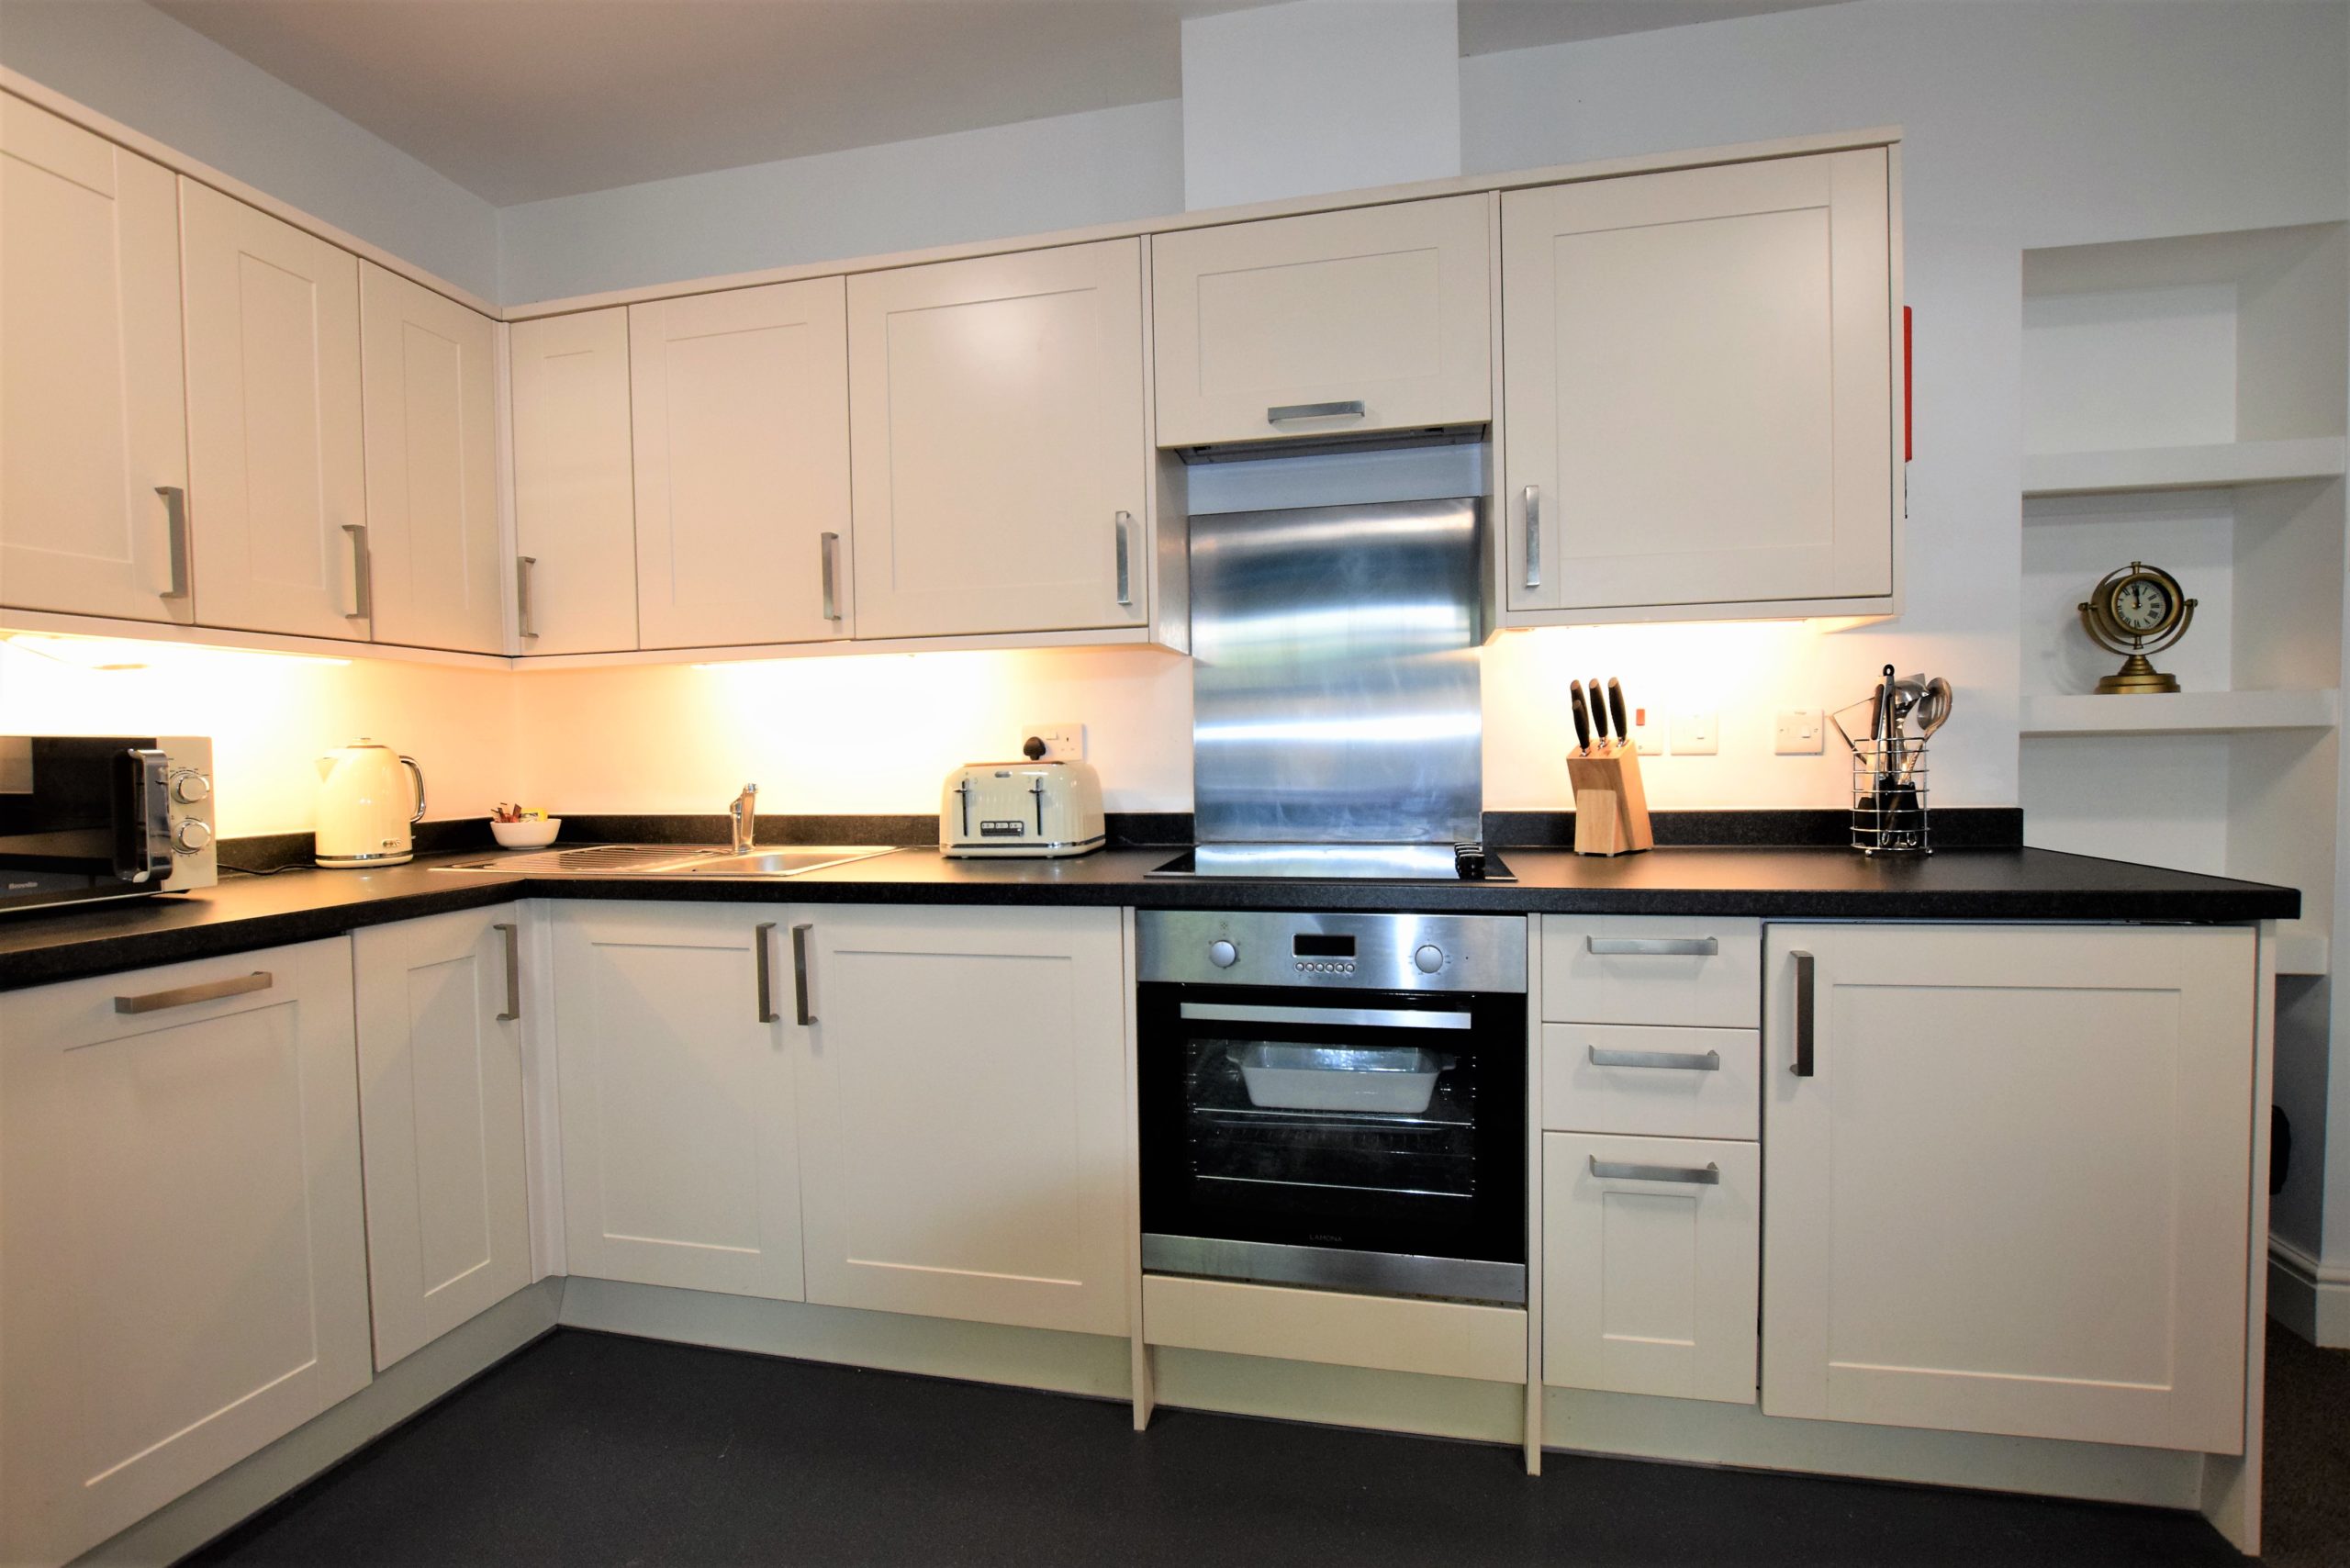 Berkeley Square No.8 - Serviced Apartment in Berkeley Square / Clifton - Your Apartment